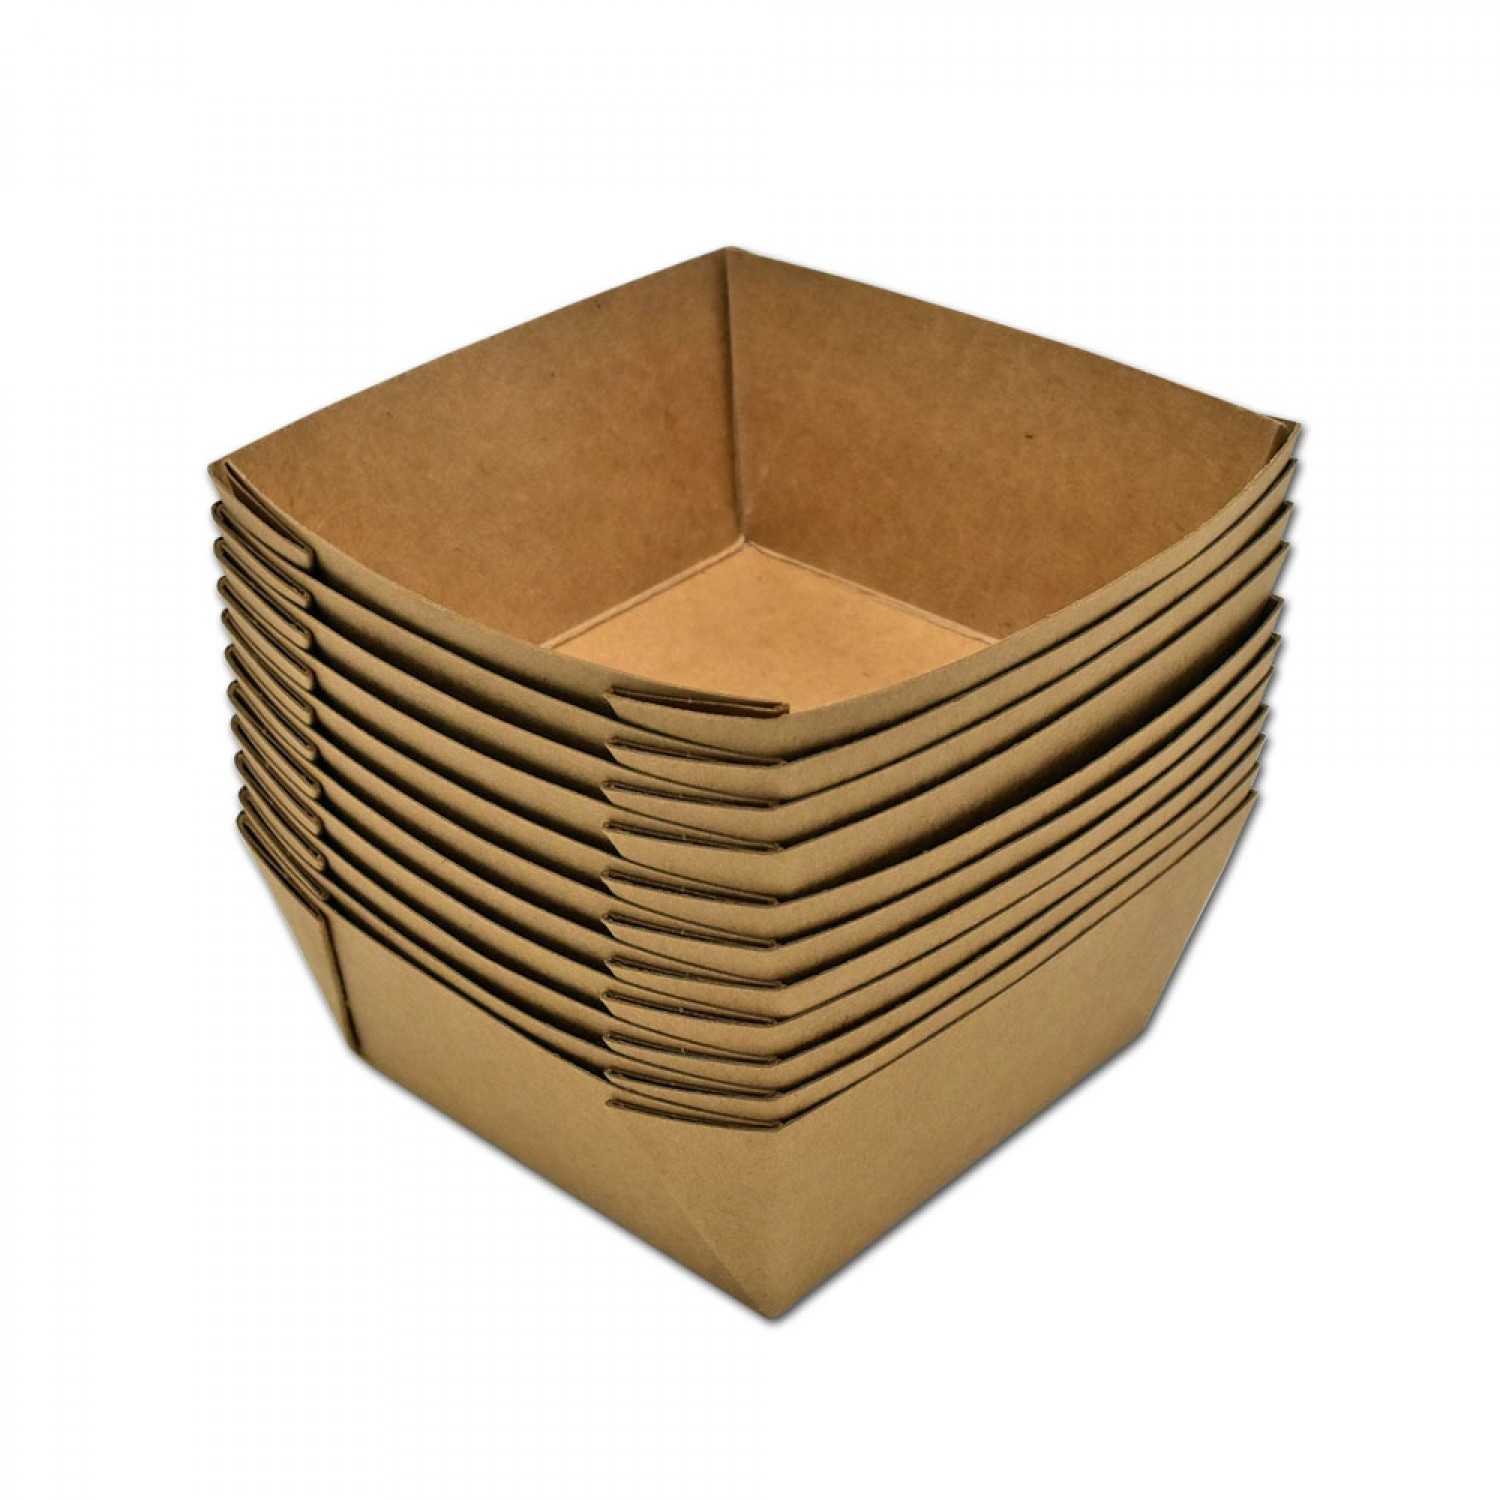 Insert Cardboard Tray for Olive Wood Coffee Knock Box NG | D.O.M.